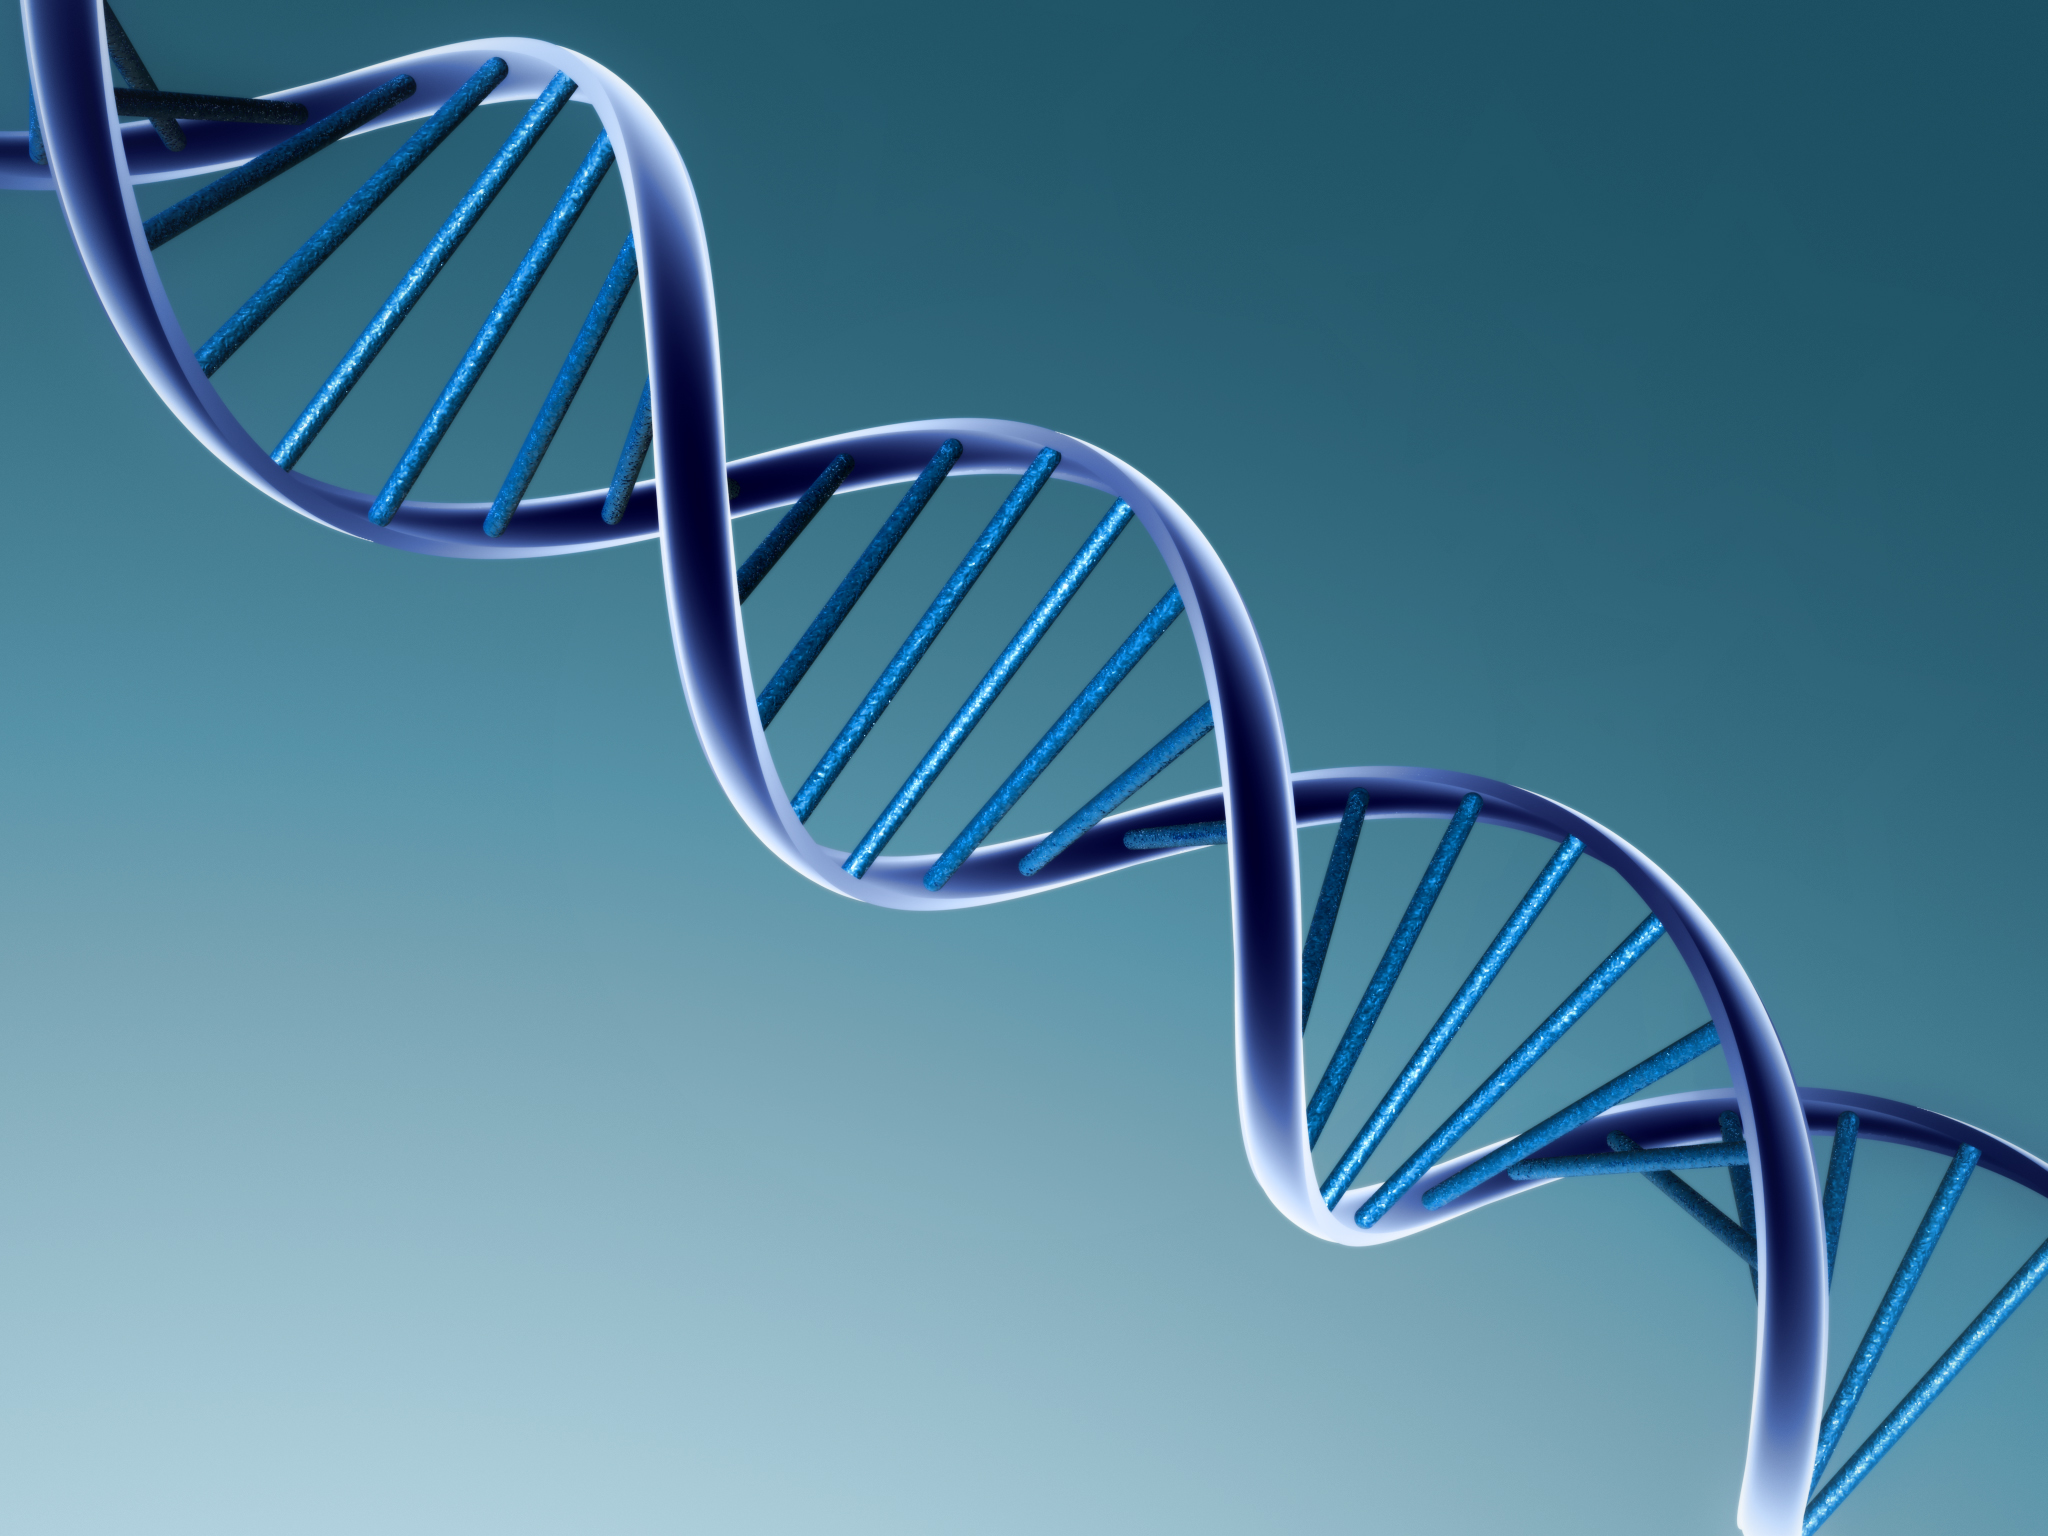 Latest study reveals 1 gram of DNA can store up to 700 terabytes of data